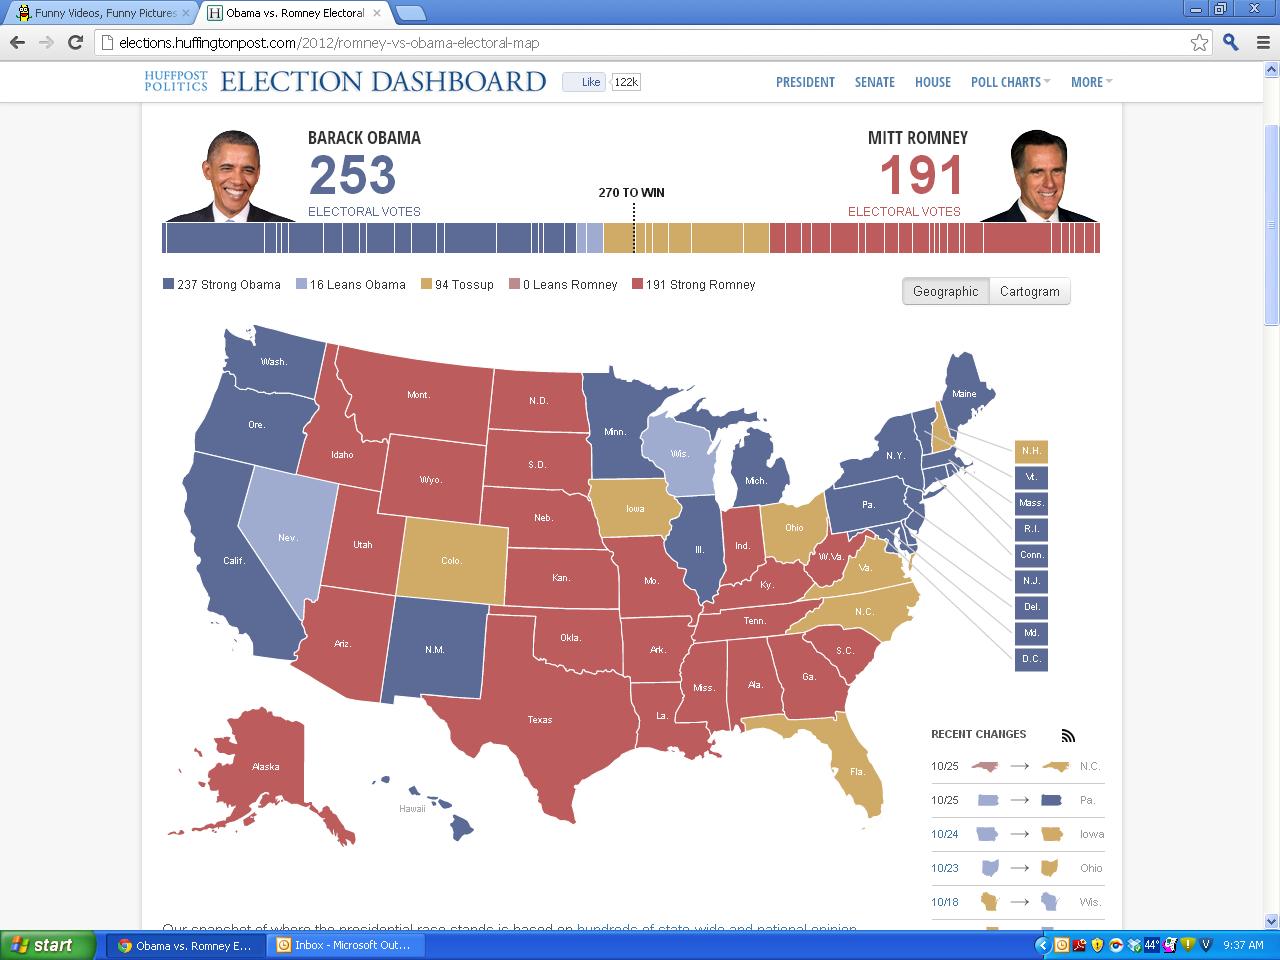 For Ebaumers needing to stay on top of politics WHILE wasting their time on EBW:   Even though Romney is winning the popular vote, the electoral college will still most likely favor Obama in the upcoming election.